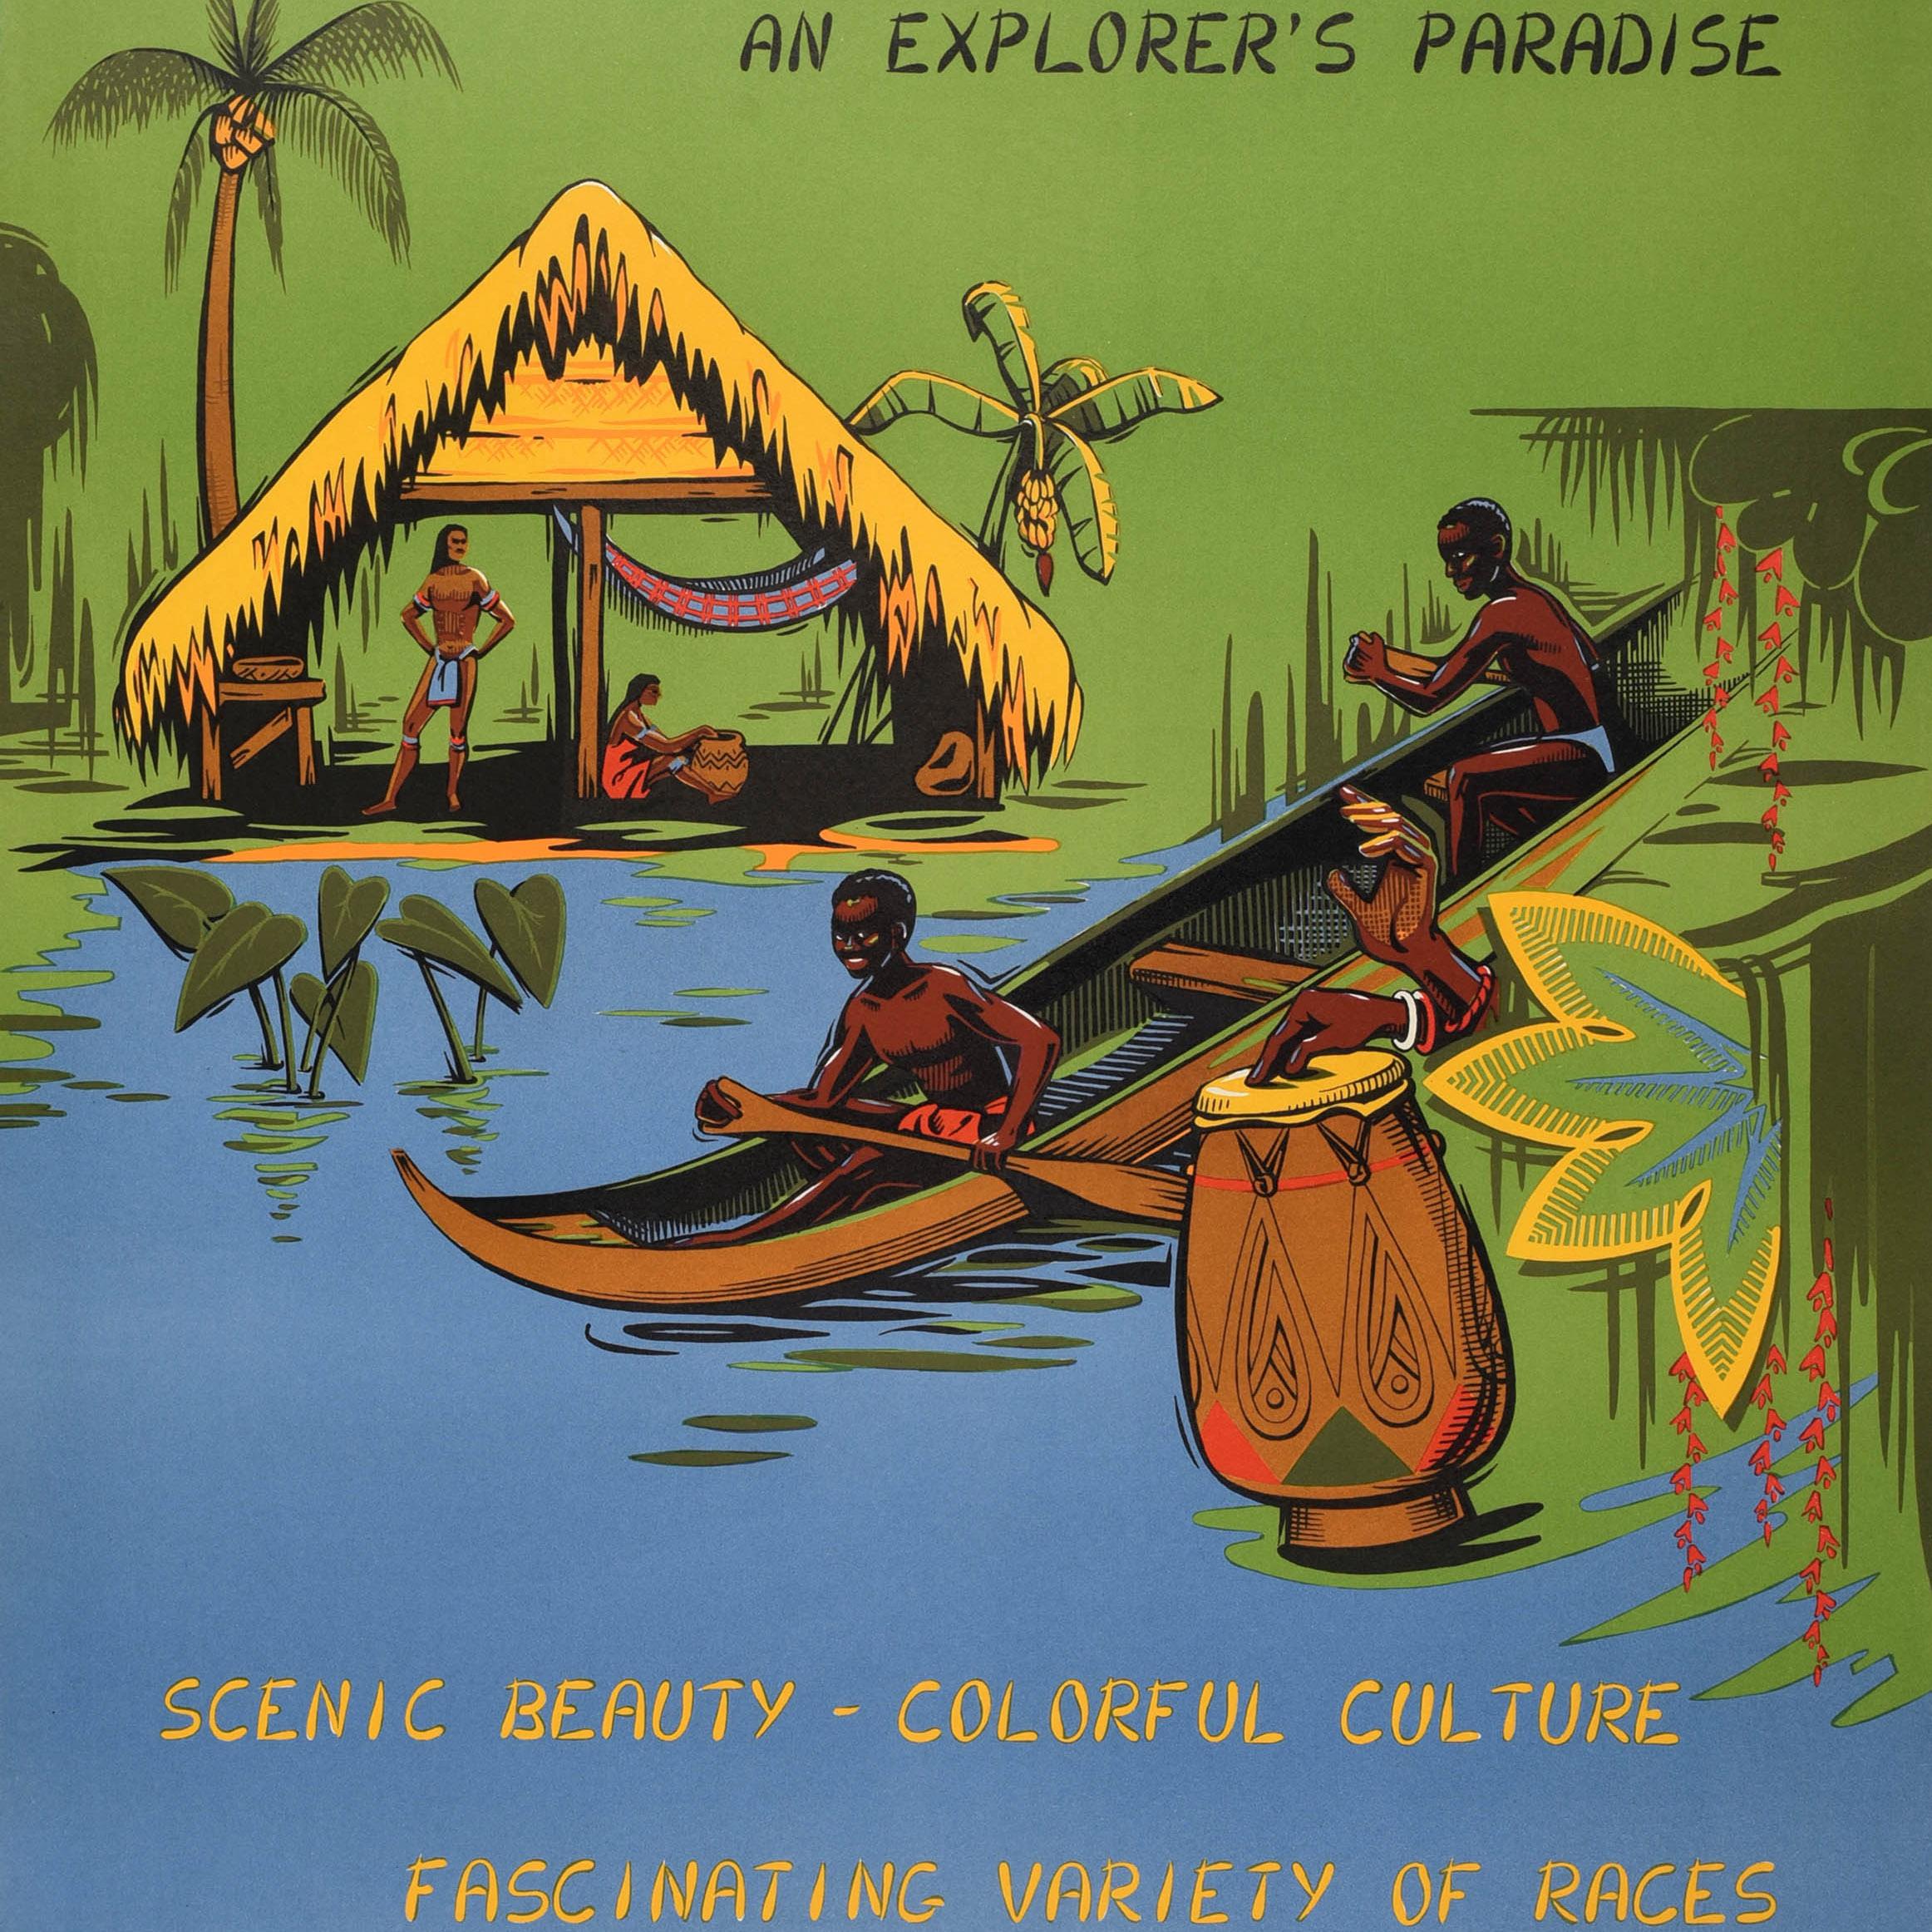 Original vintage South America travel poster - Surinam An Explorer's Paradise Scenic Beauty Colourful Culture Fascinating Variety of Races - showing two people rowing in a canoe on a blue river with a pair of hands playing drums in the green